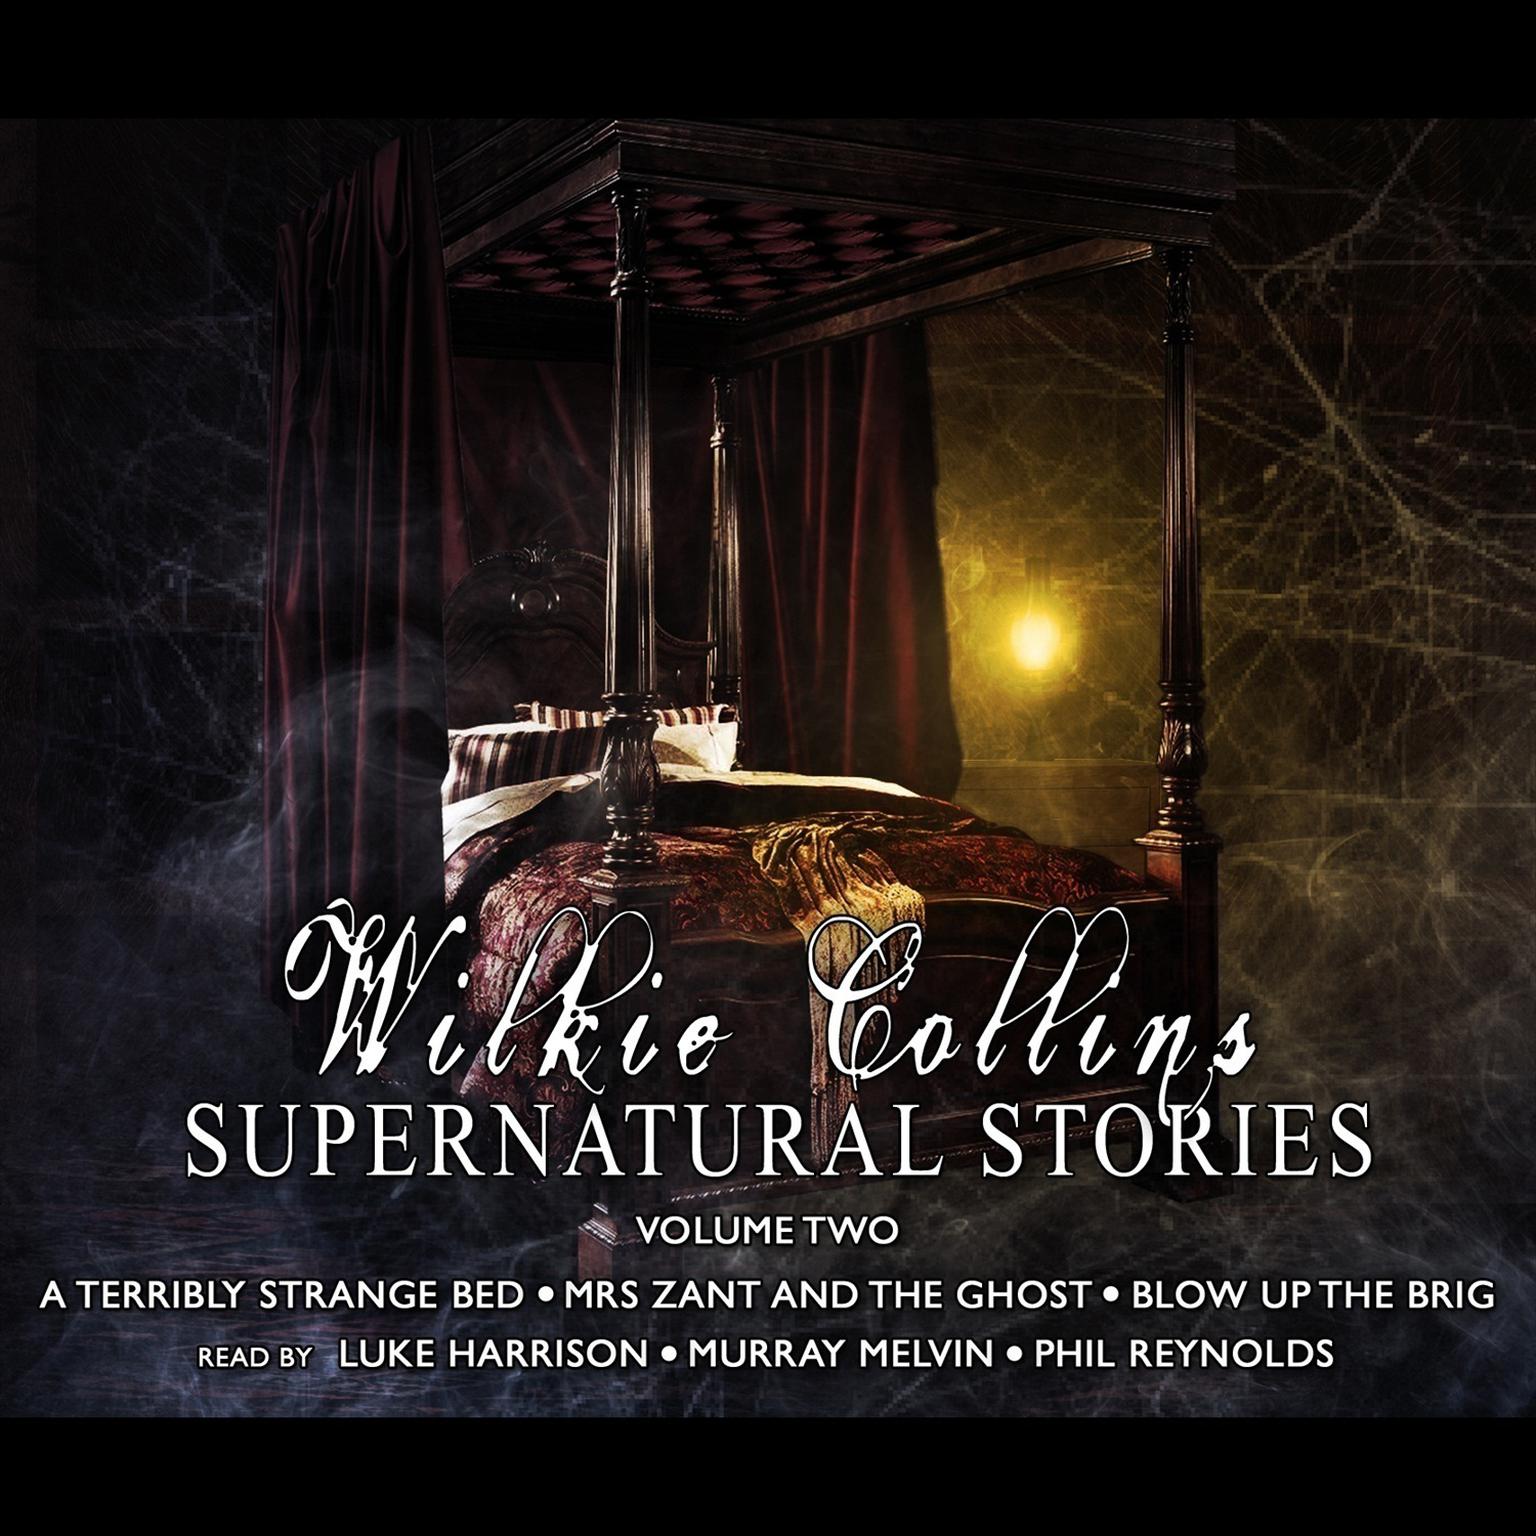 Wilkie Collins: Supernatural Stories, Vol. 2 (Abridged): A Terribly Strange Bed, Mrs. Zant and the Ghost, and Blow Up the Brig Audiobook, by Wilkie Collins